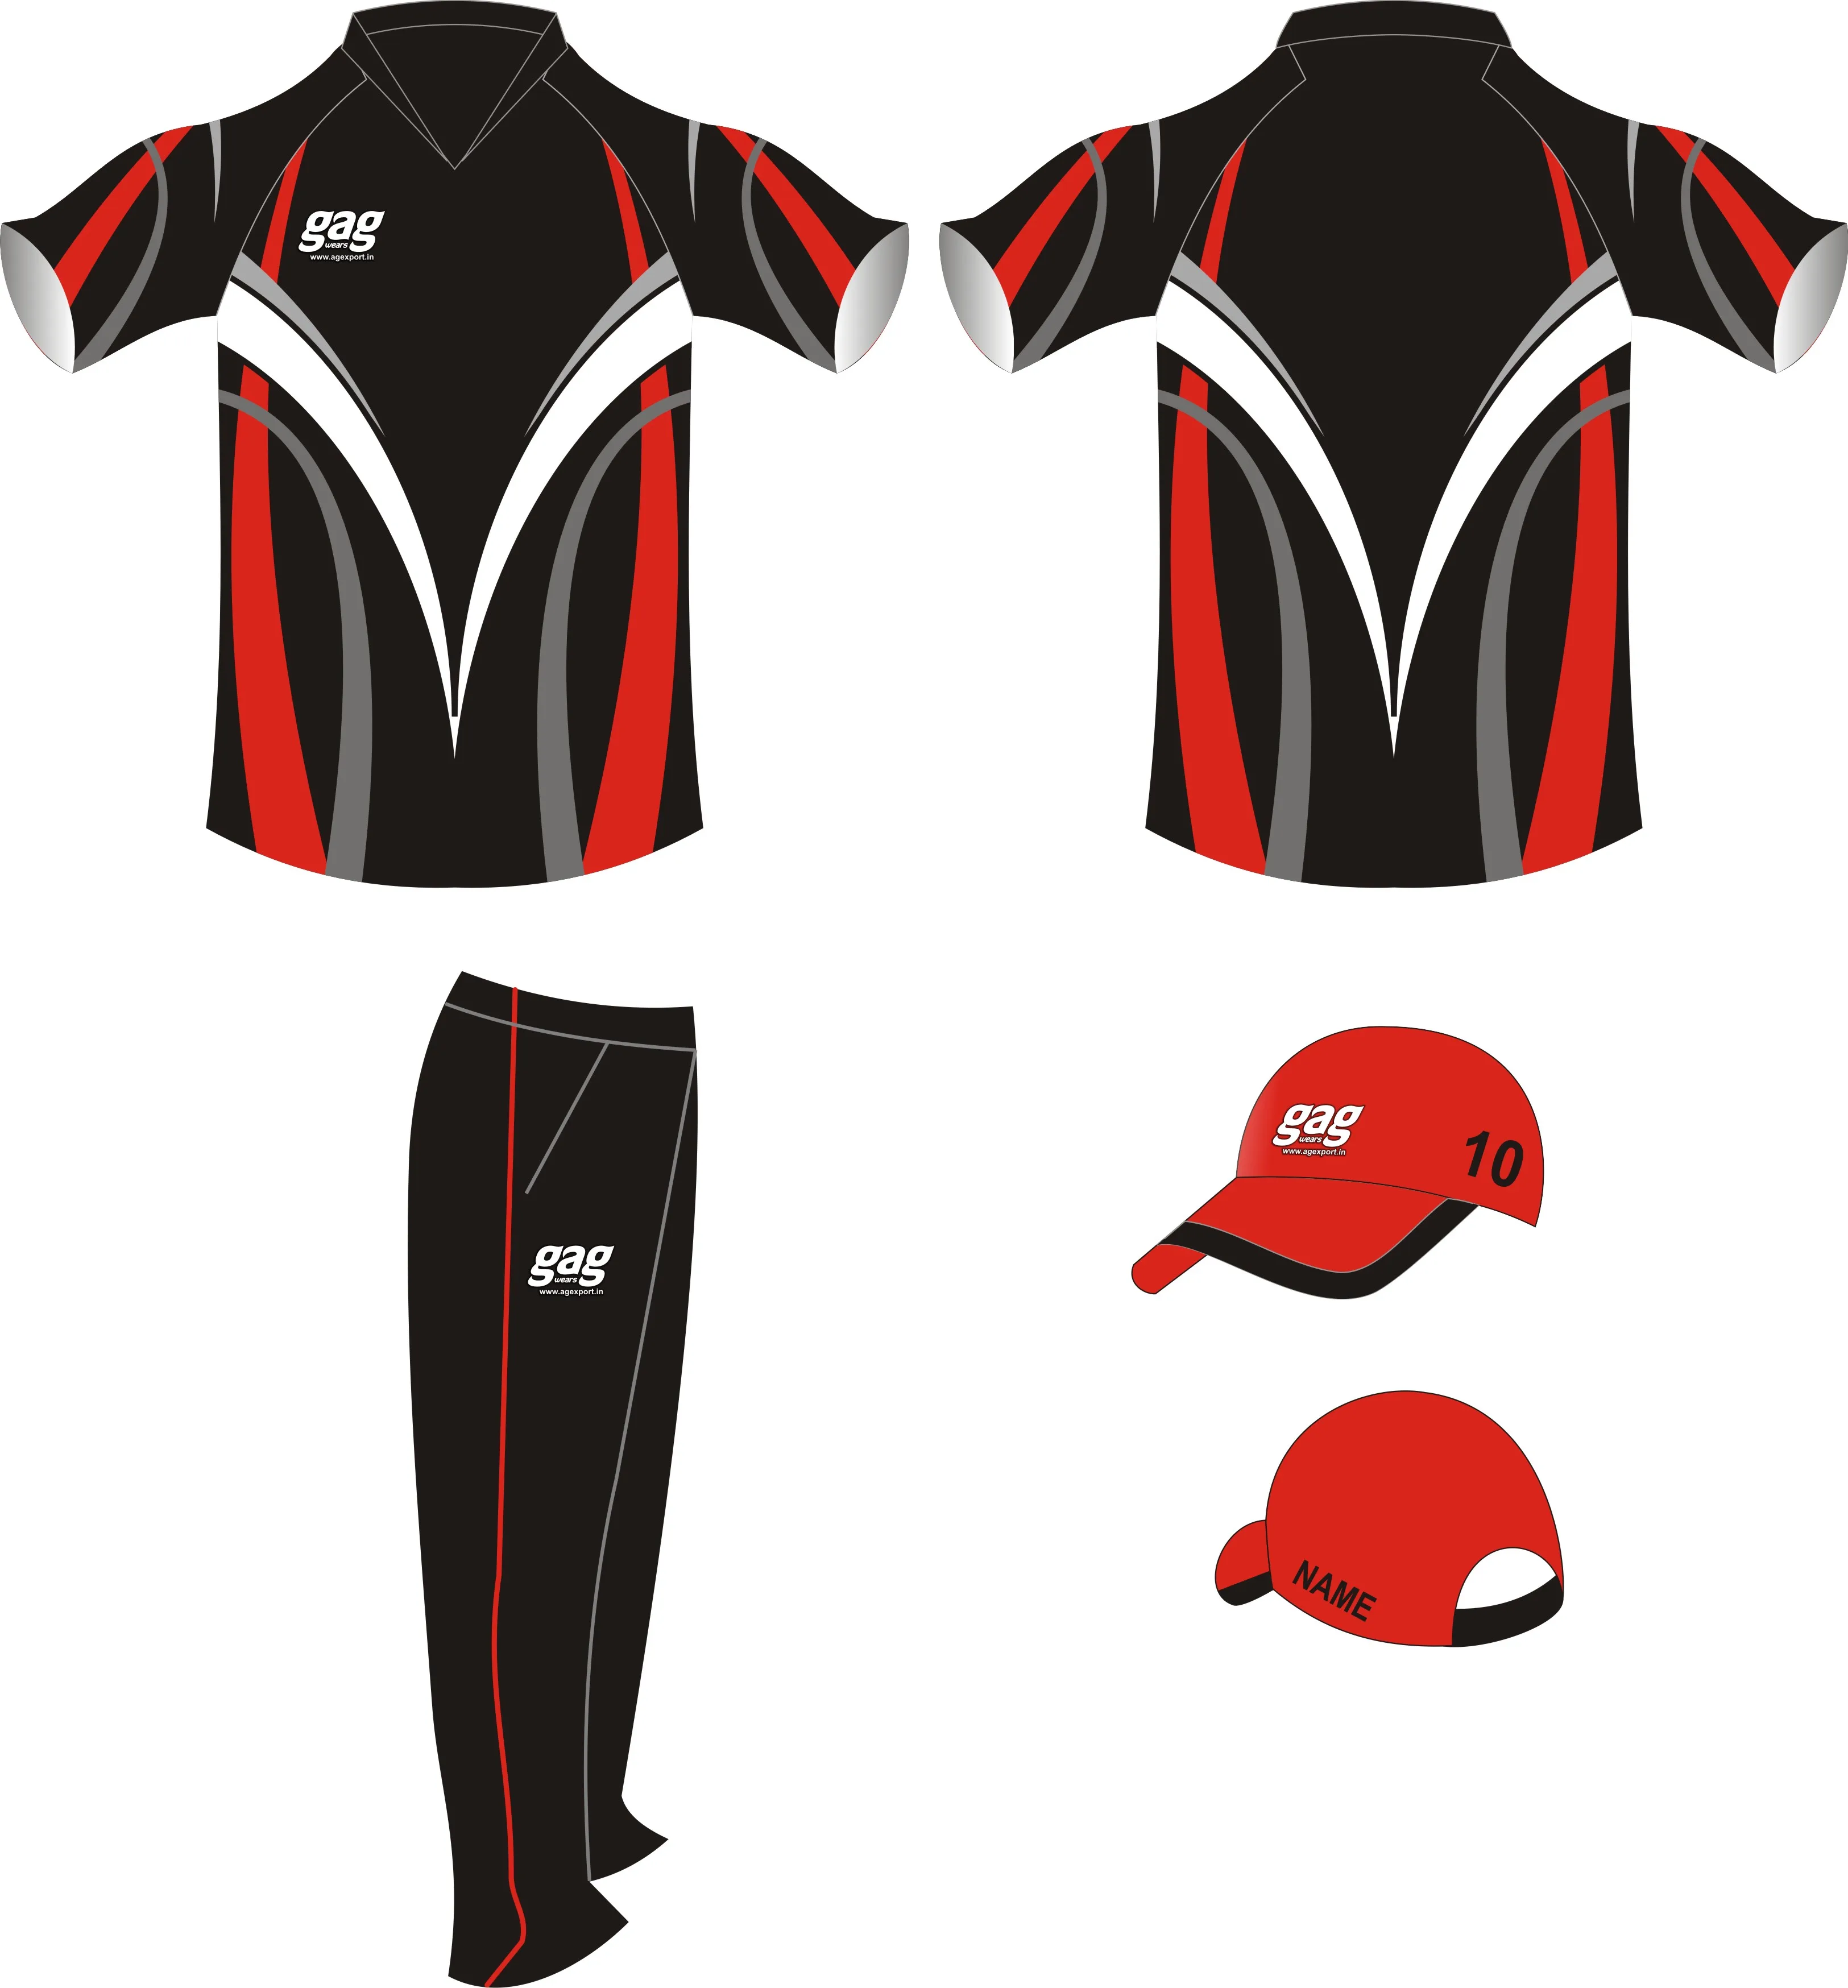 Cricket Jersey Online Shopping - Buy Cricket Jersey Online Shopping,Taiwan Online Shopping,Online Wholesale Shop Product on Alibaba.com